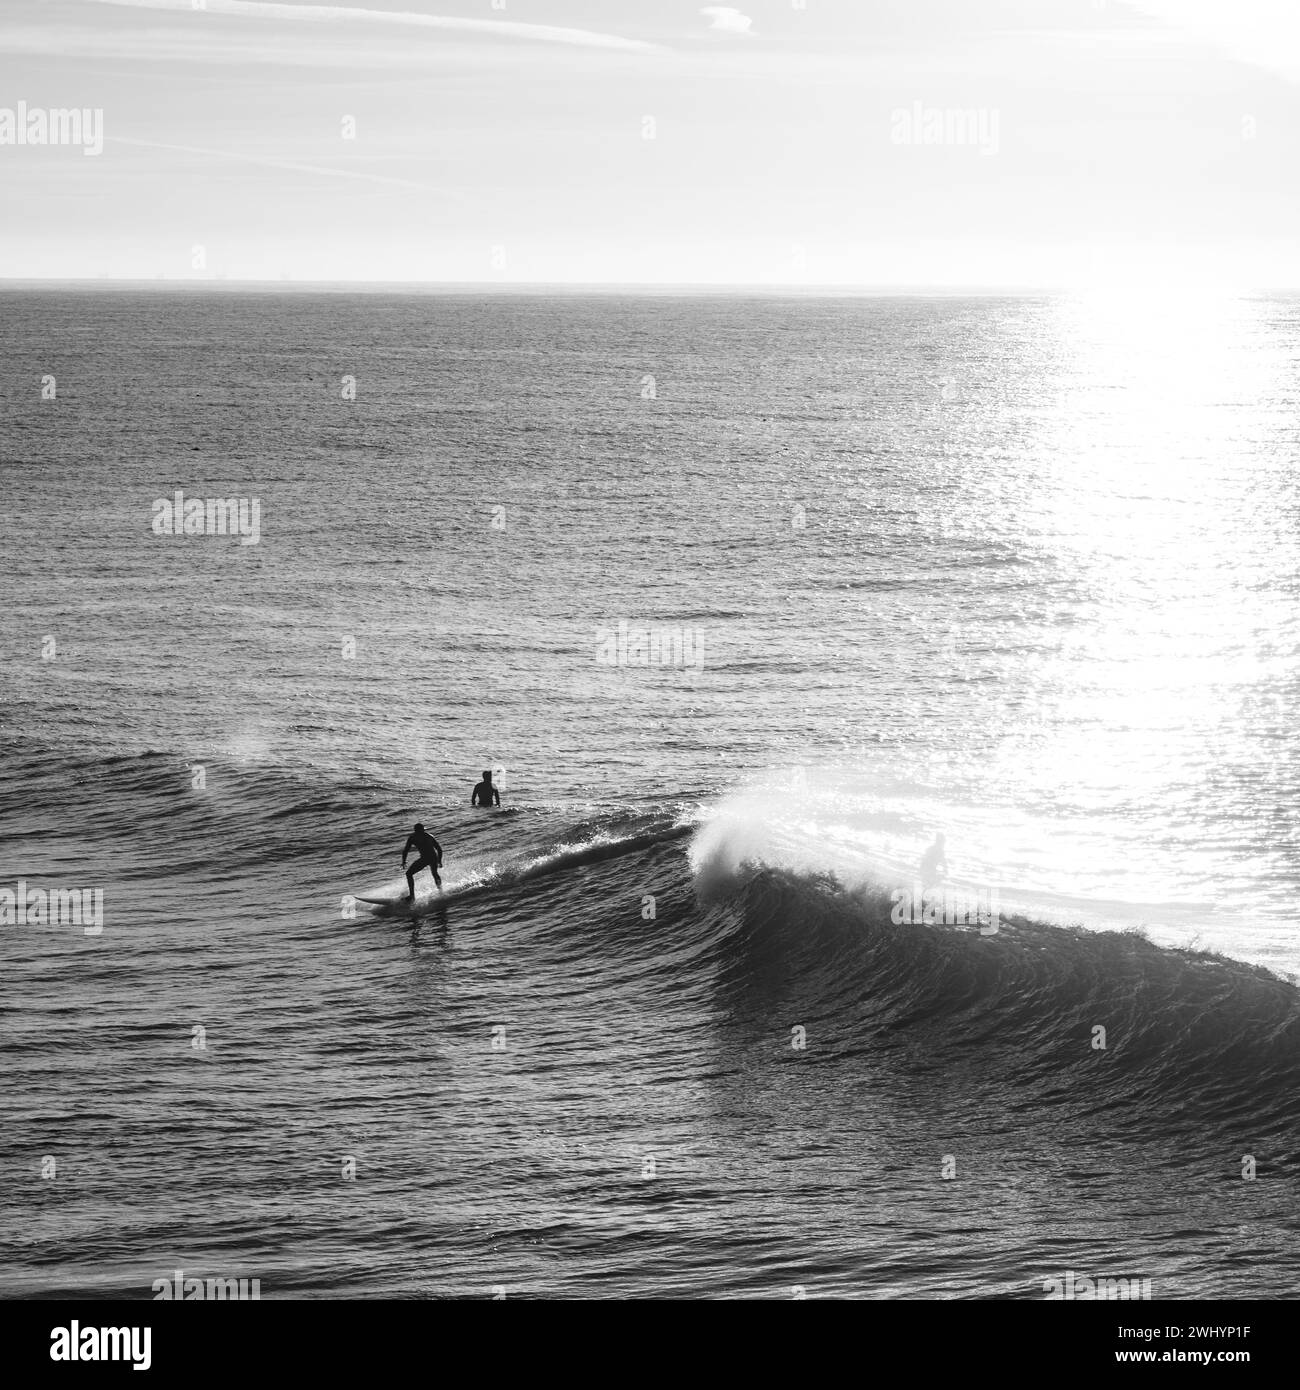 People, Surfing, Campus Point, UCSB, Early Morning Light, California Surfing Culture, Beautiful Waves, Coastal Lifestyle Stock Photo